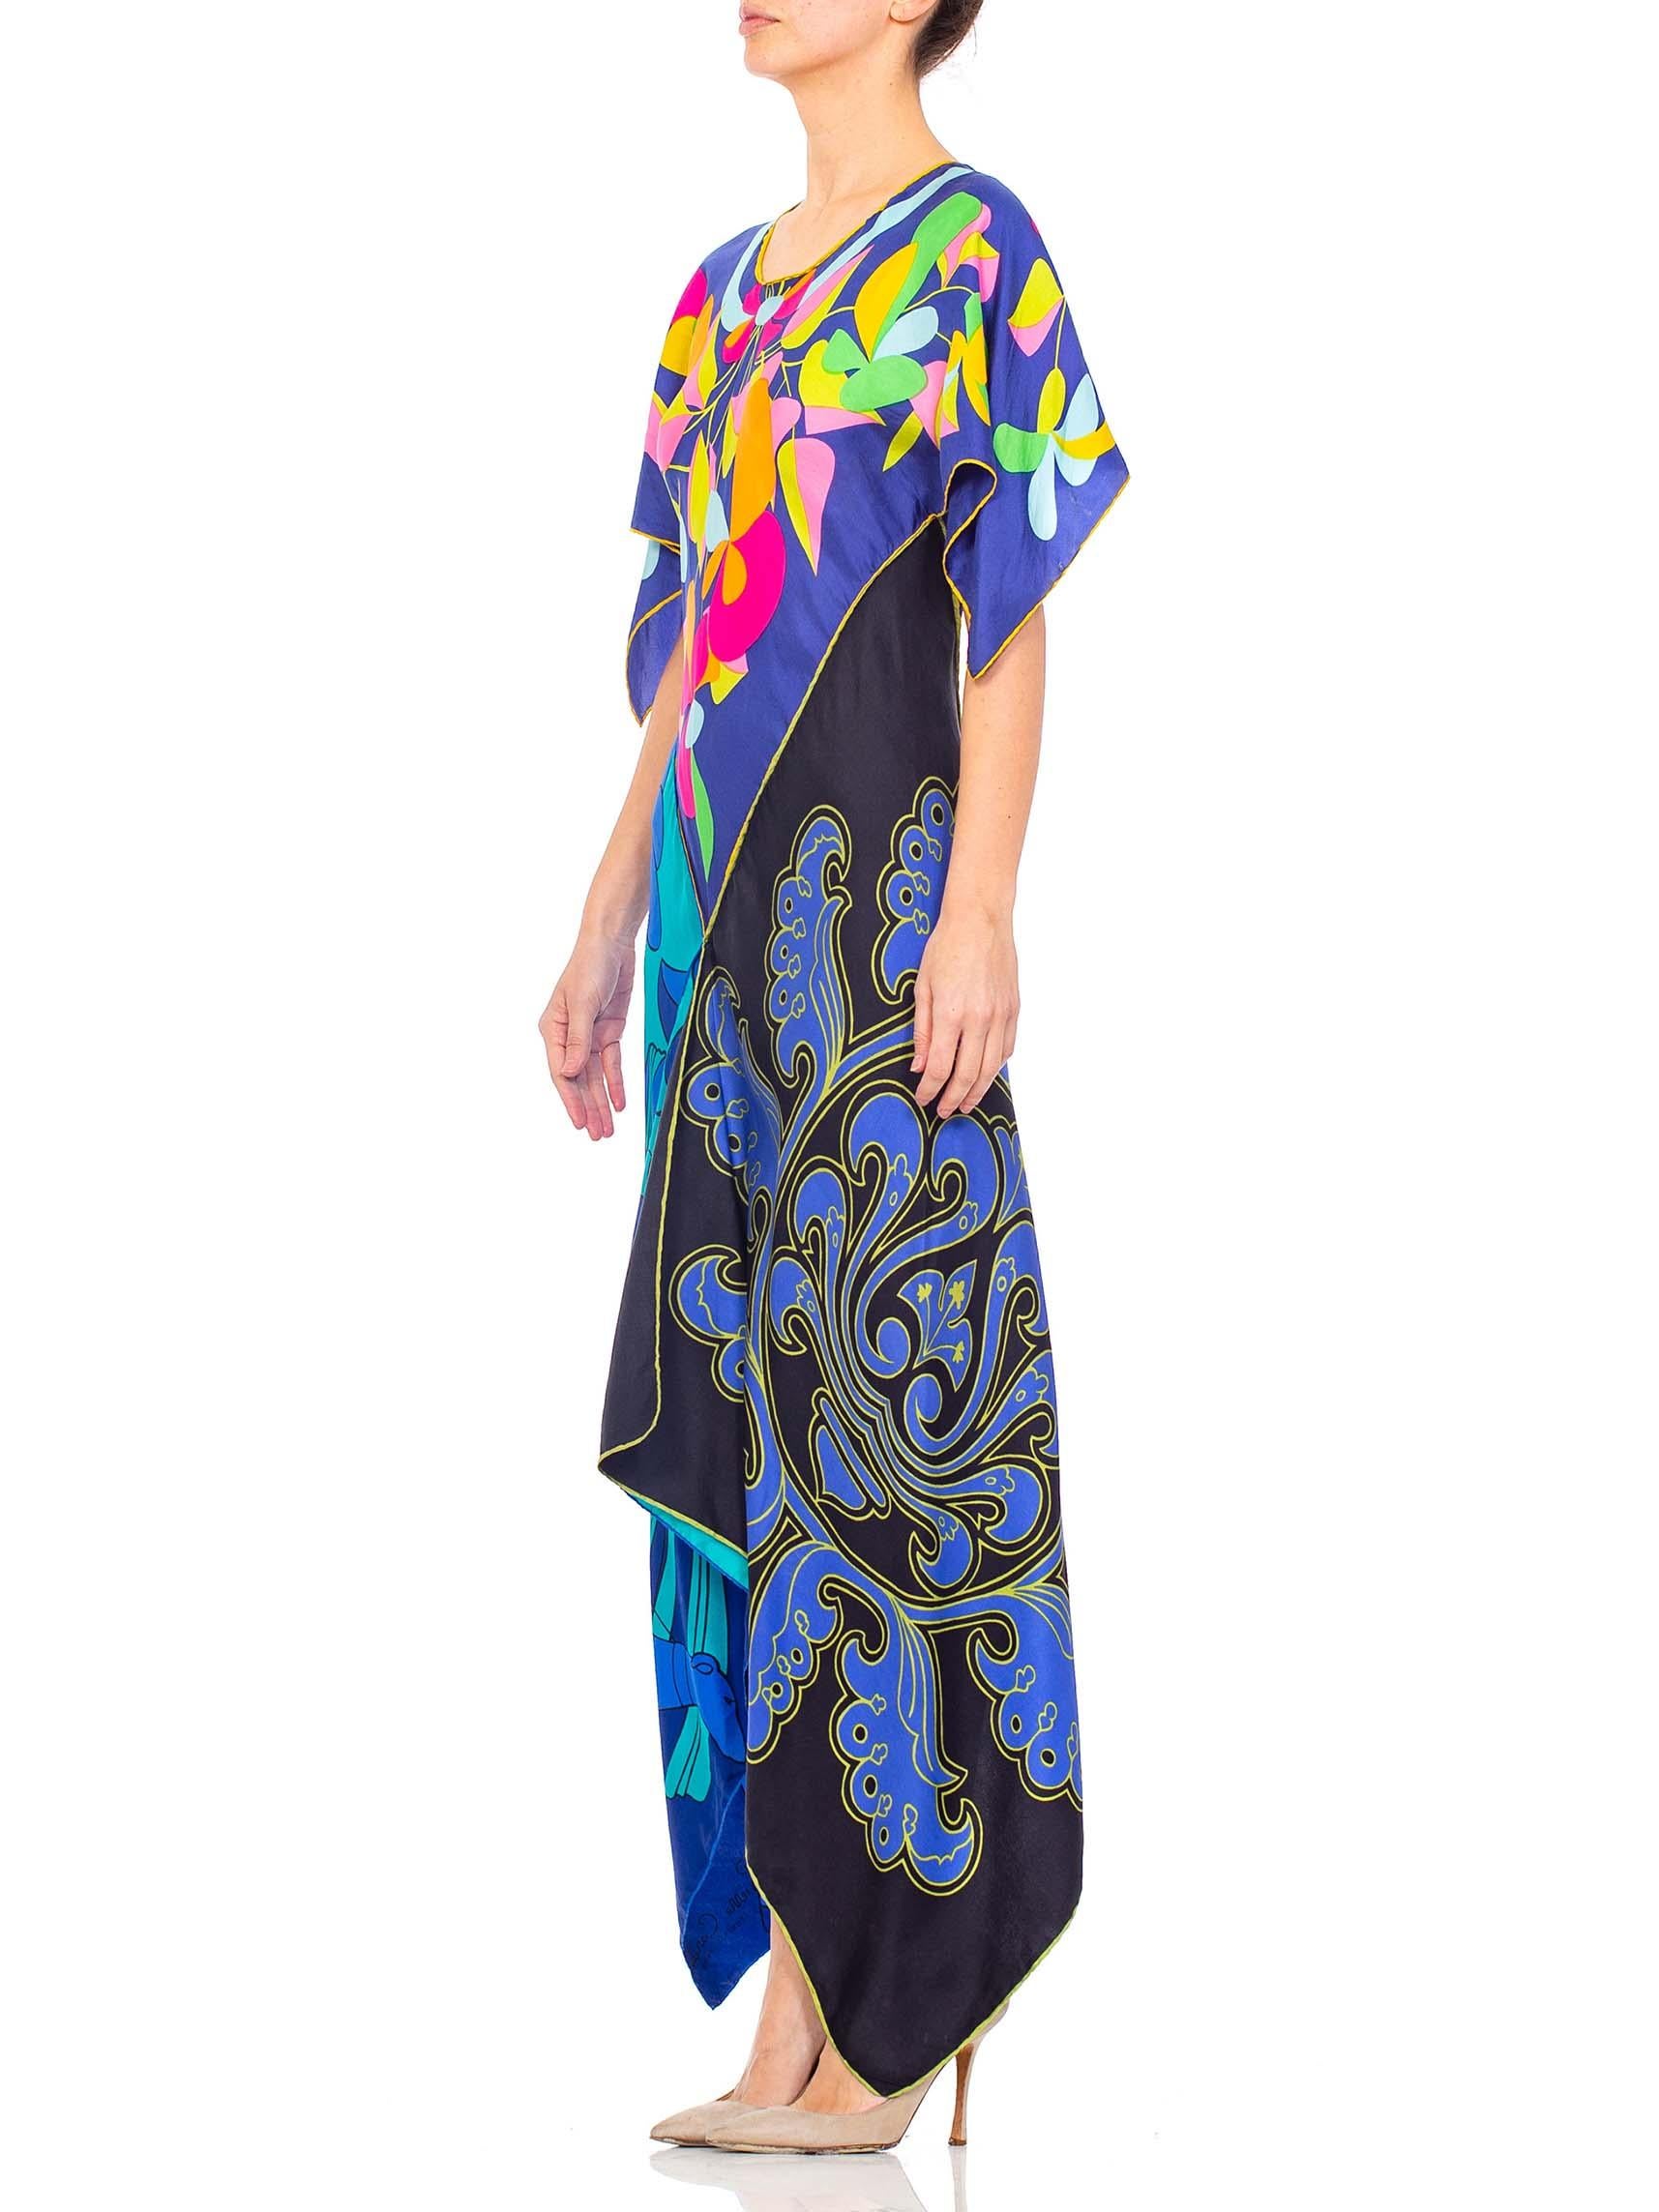 MORPHEW COLLECTION Psychedelic Aqua & Pink Bias Cut Kaftan Dress Made From 1970 3